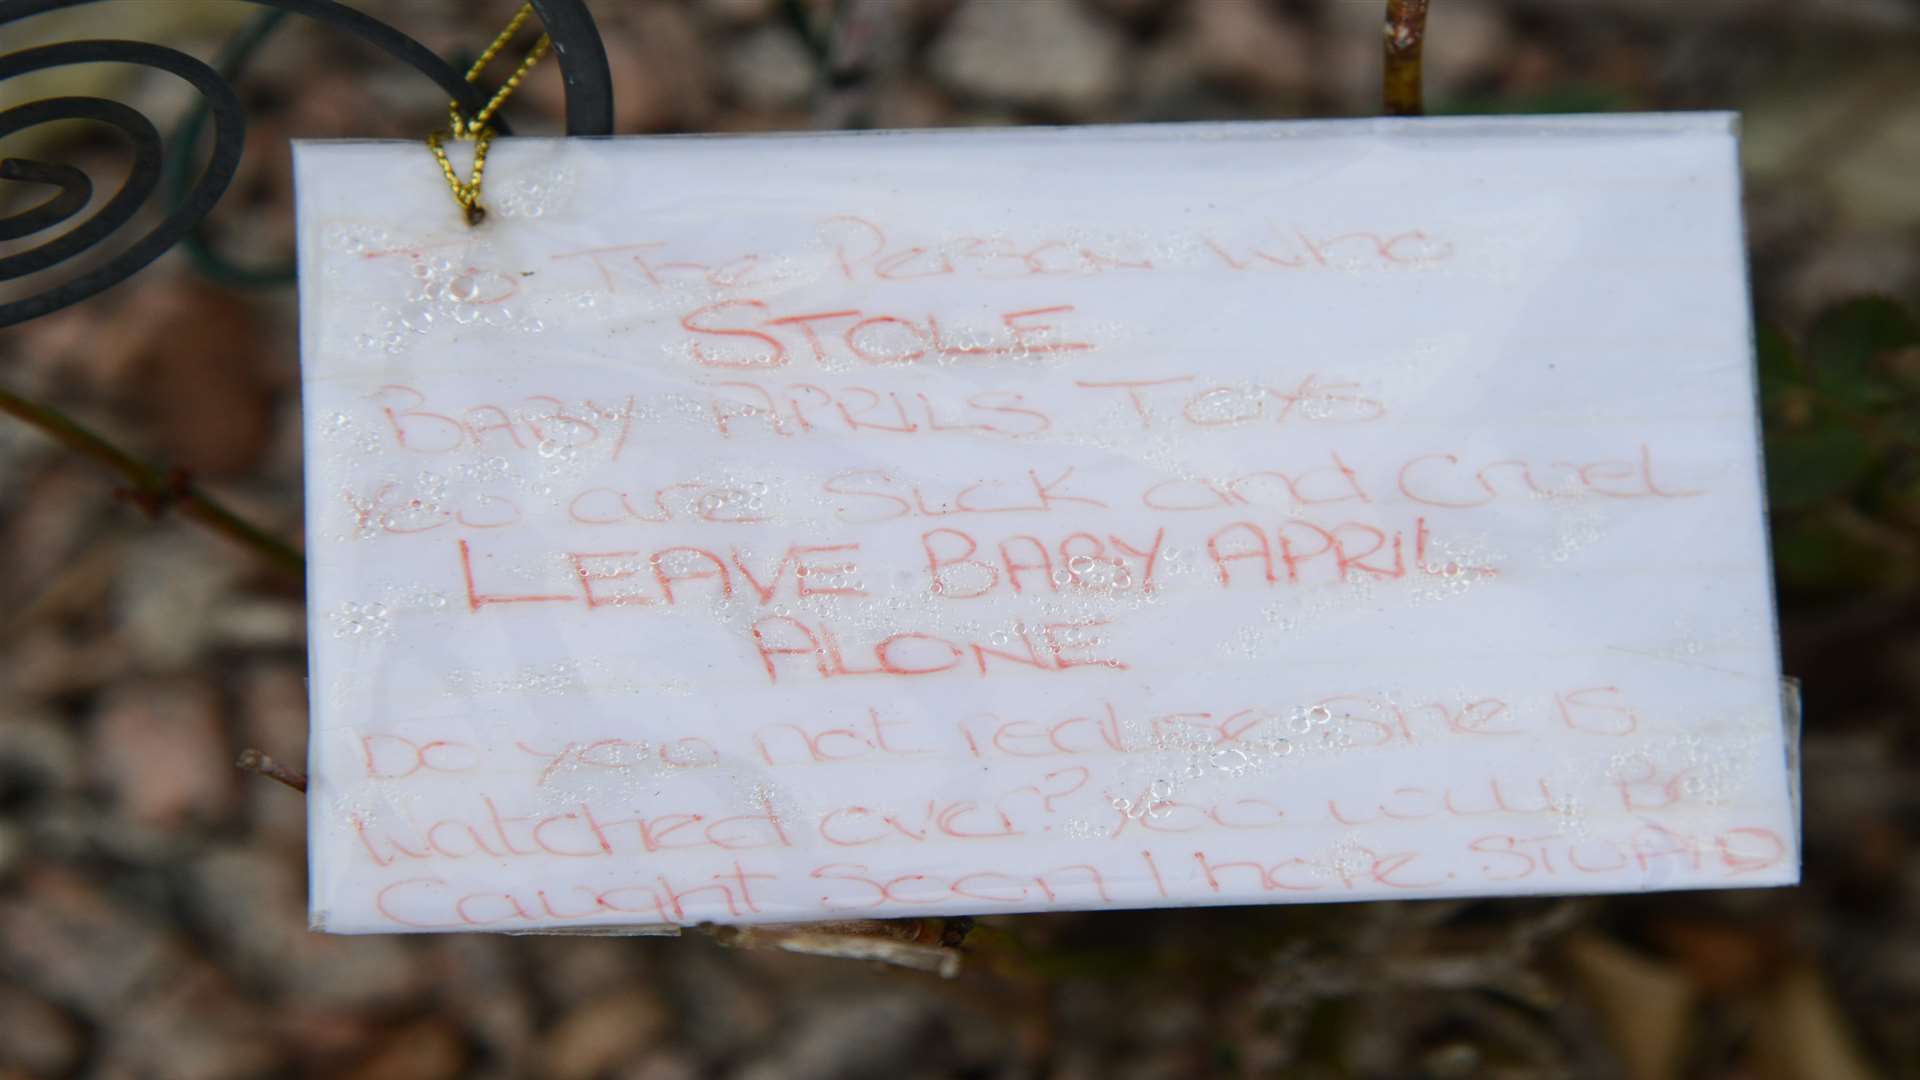 The note left on the grave. Picture: Gary Browne